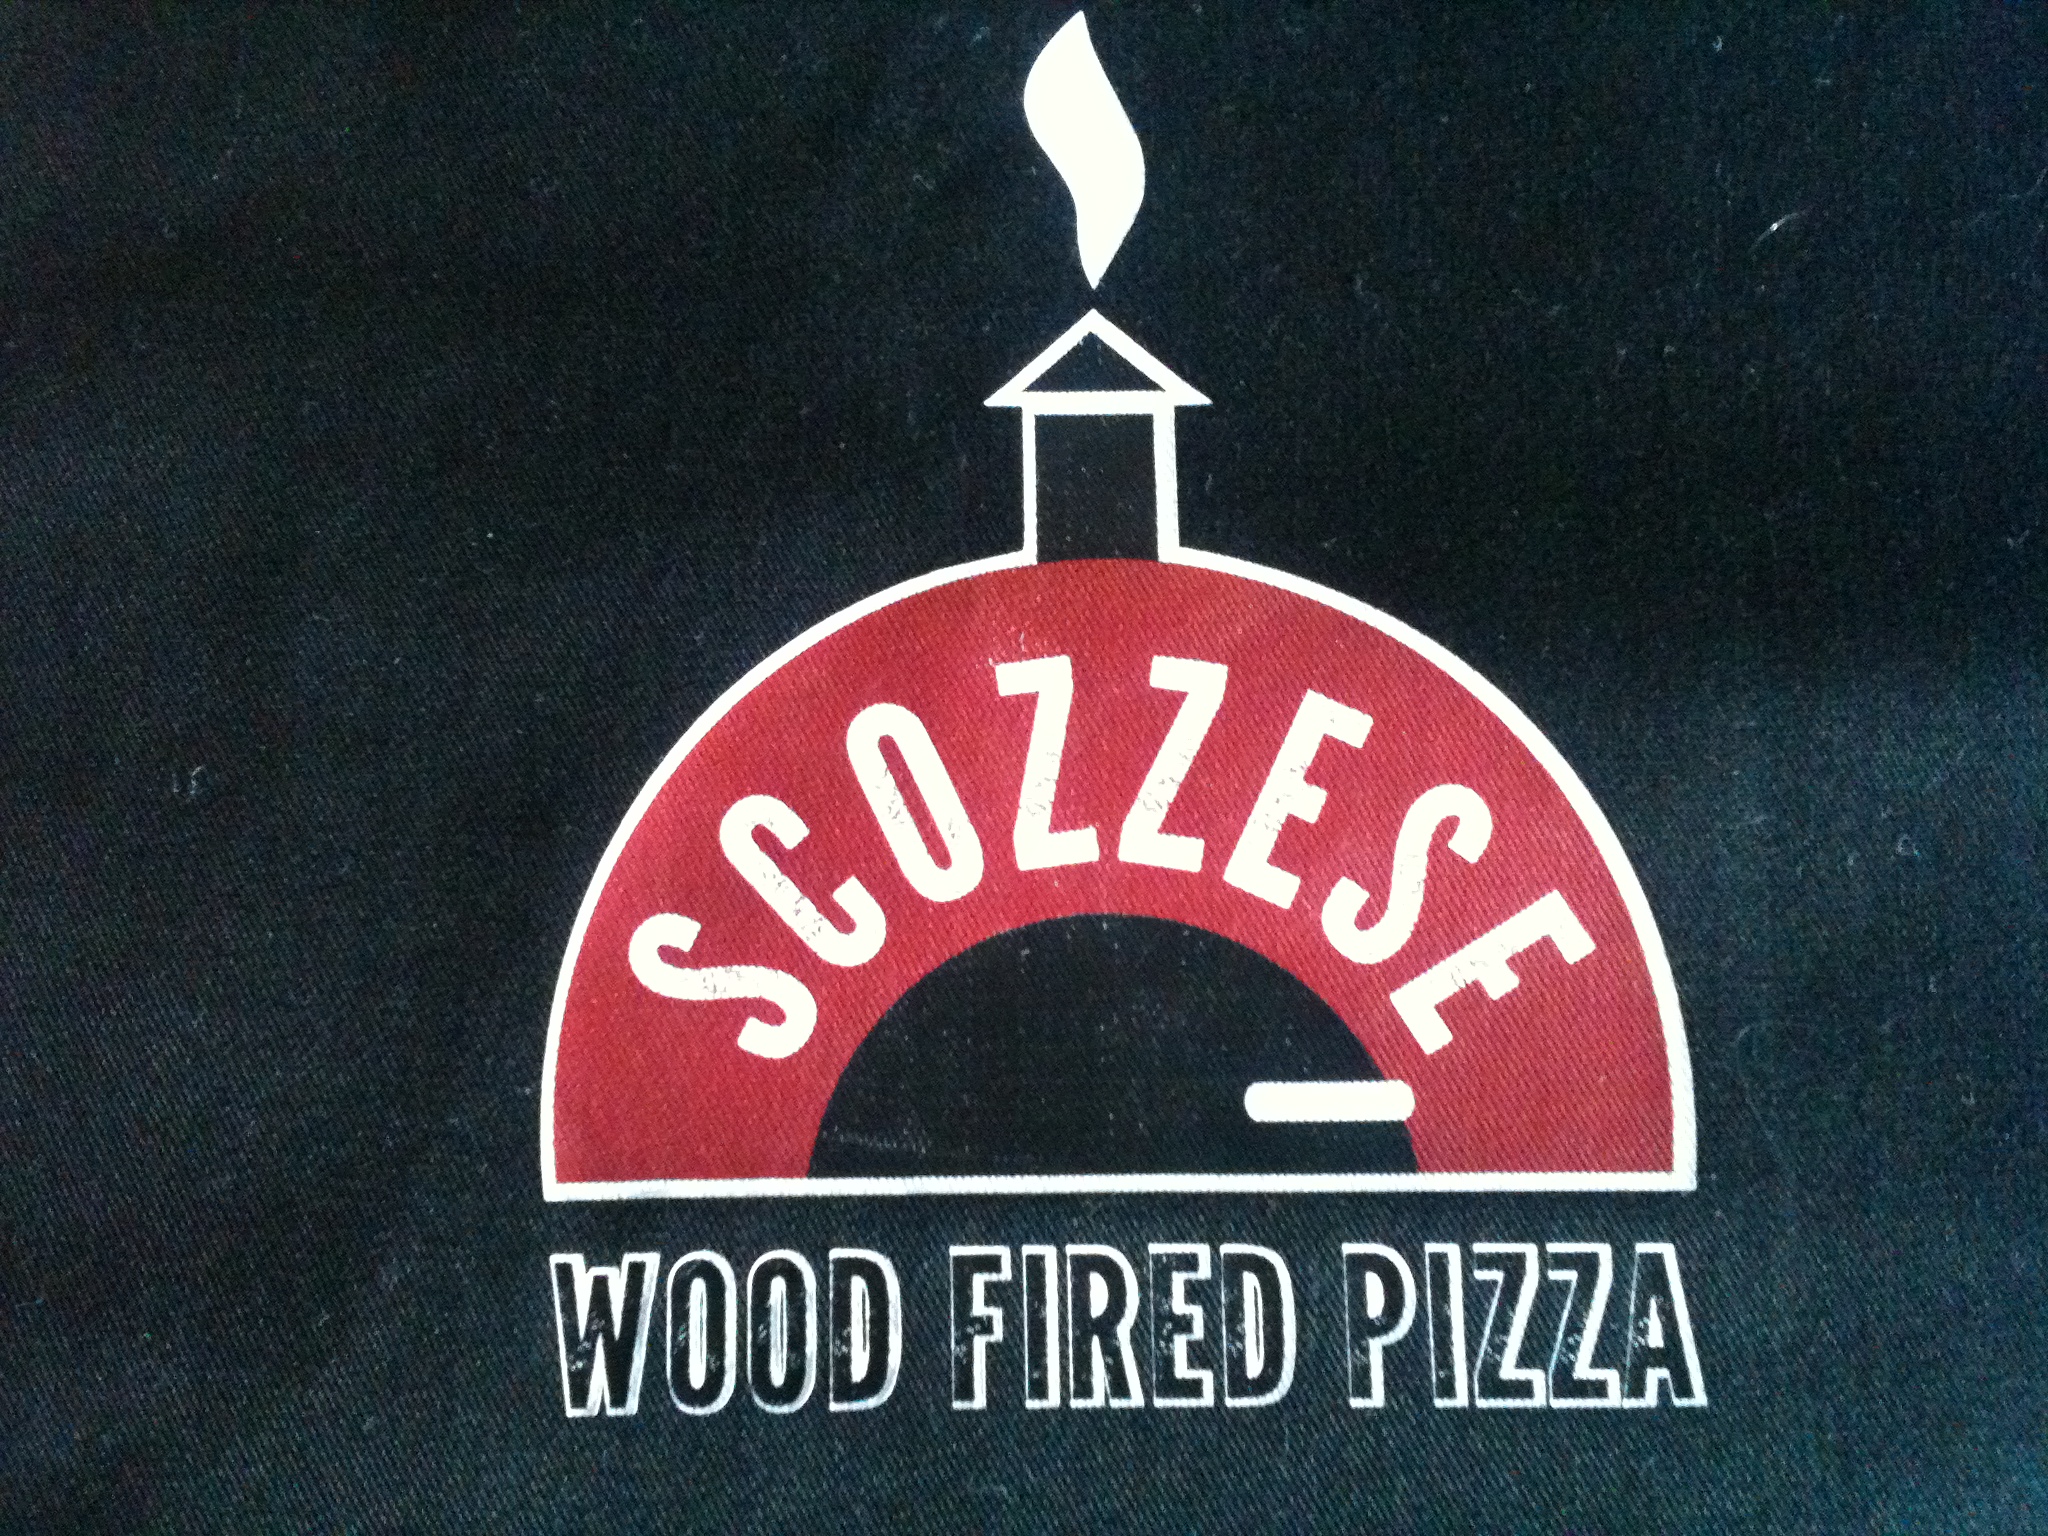 Scozzese Wood Fired Pizza